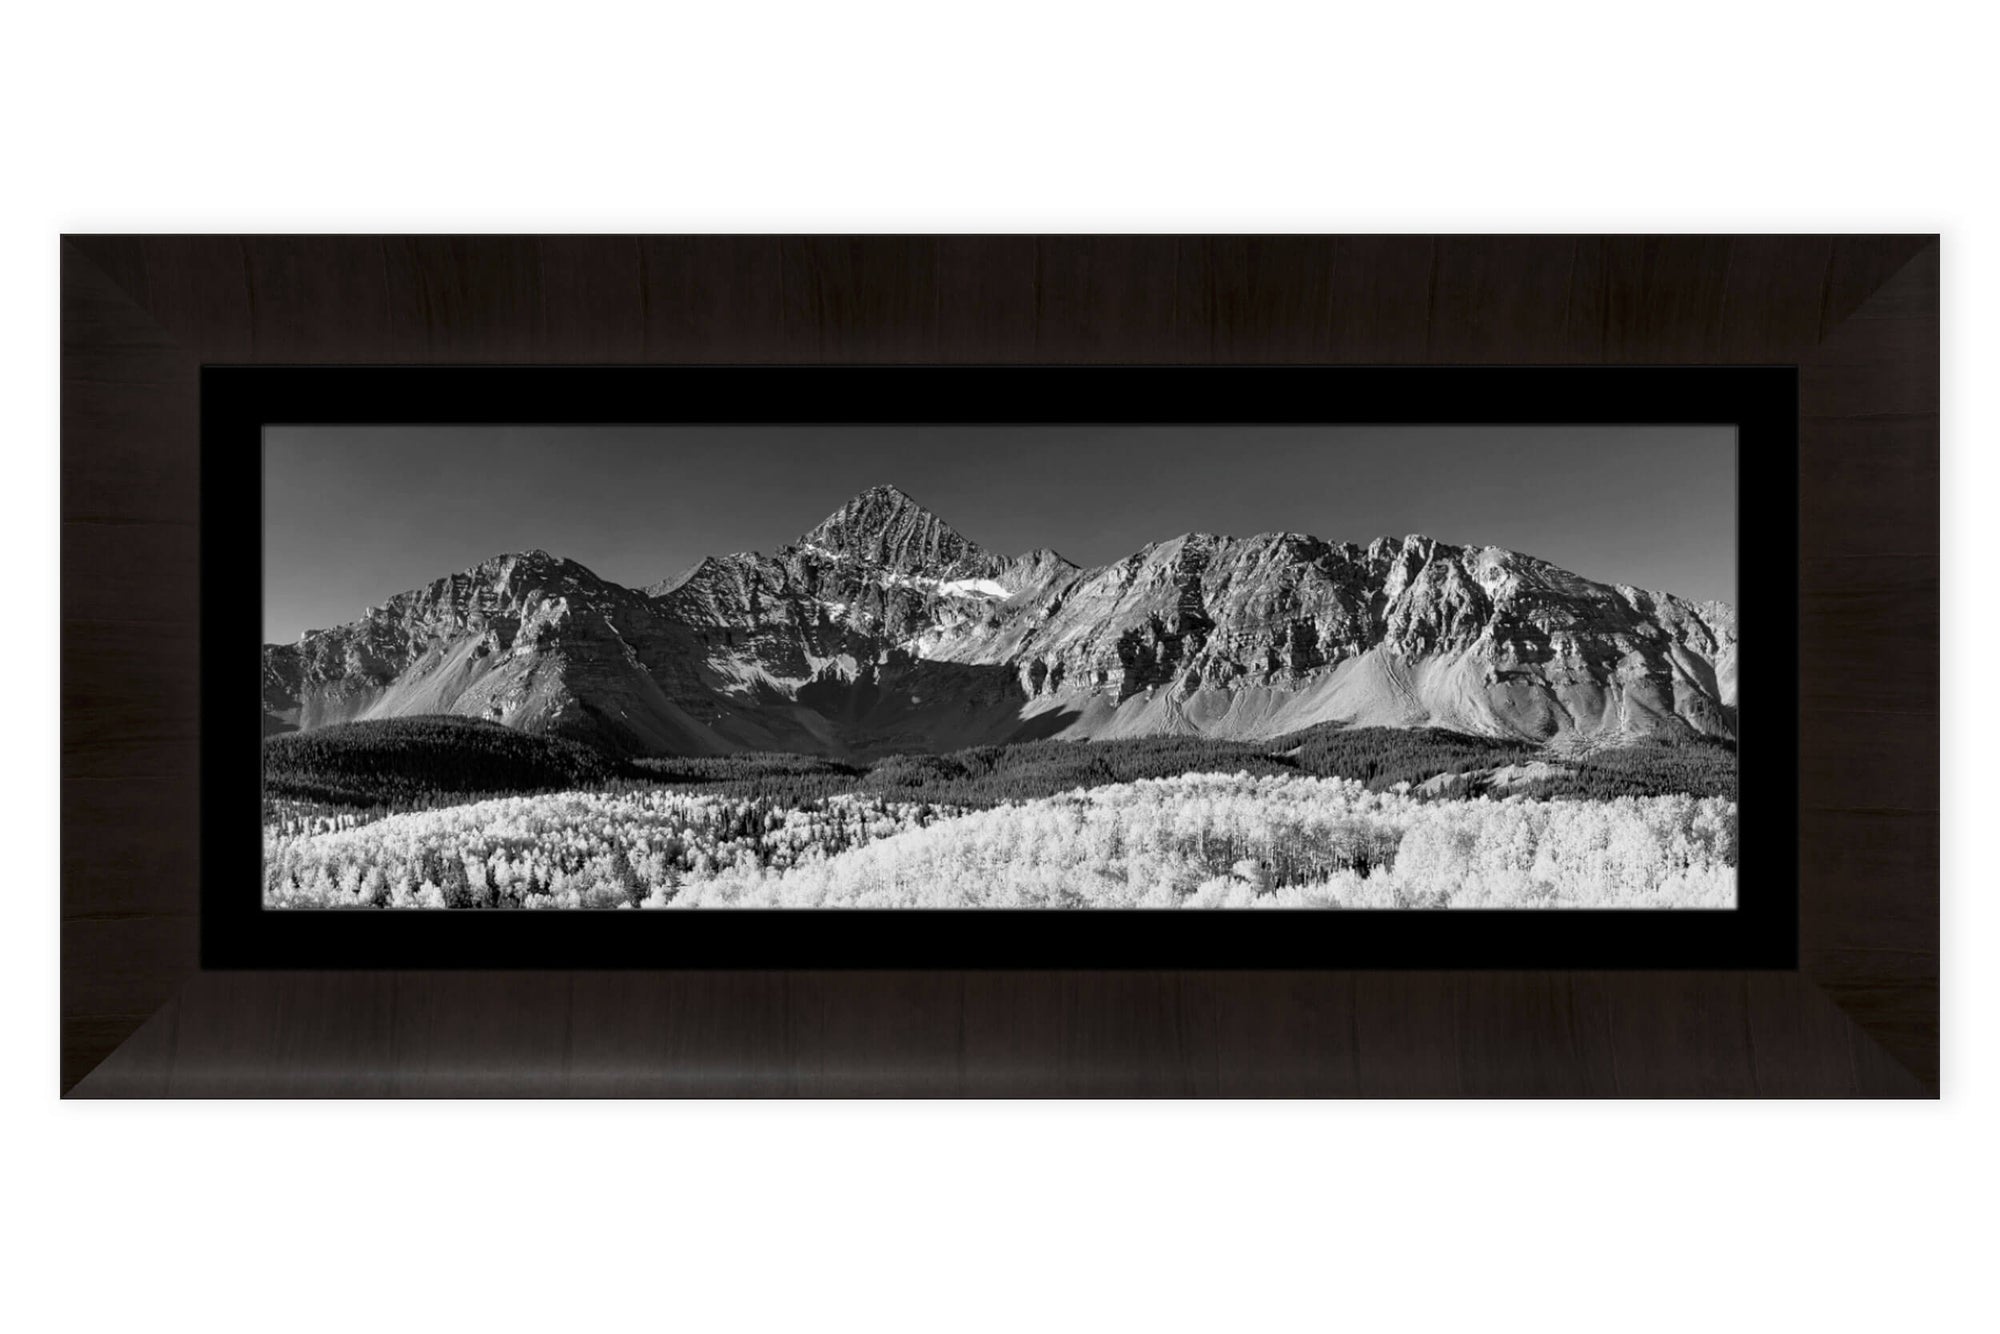 A framed black and white Mount Wilson picture near Telluride, Colorado.